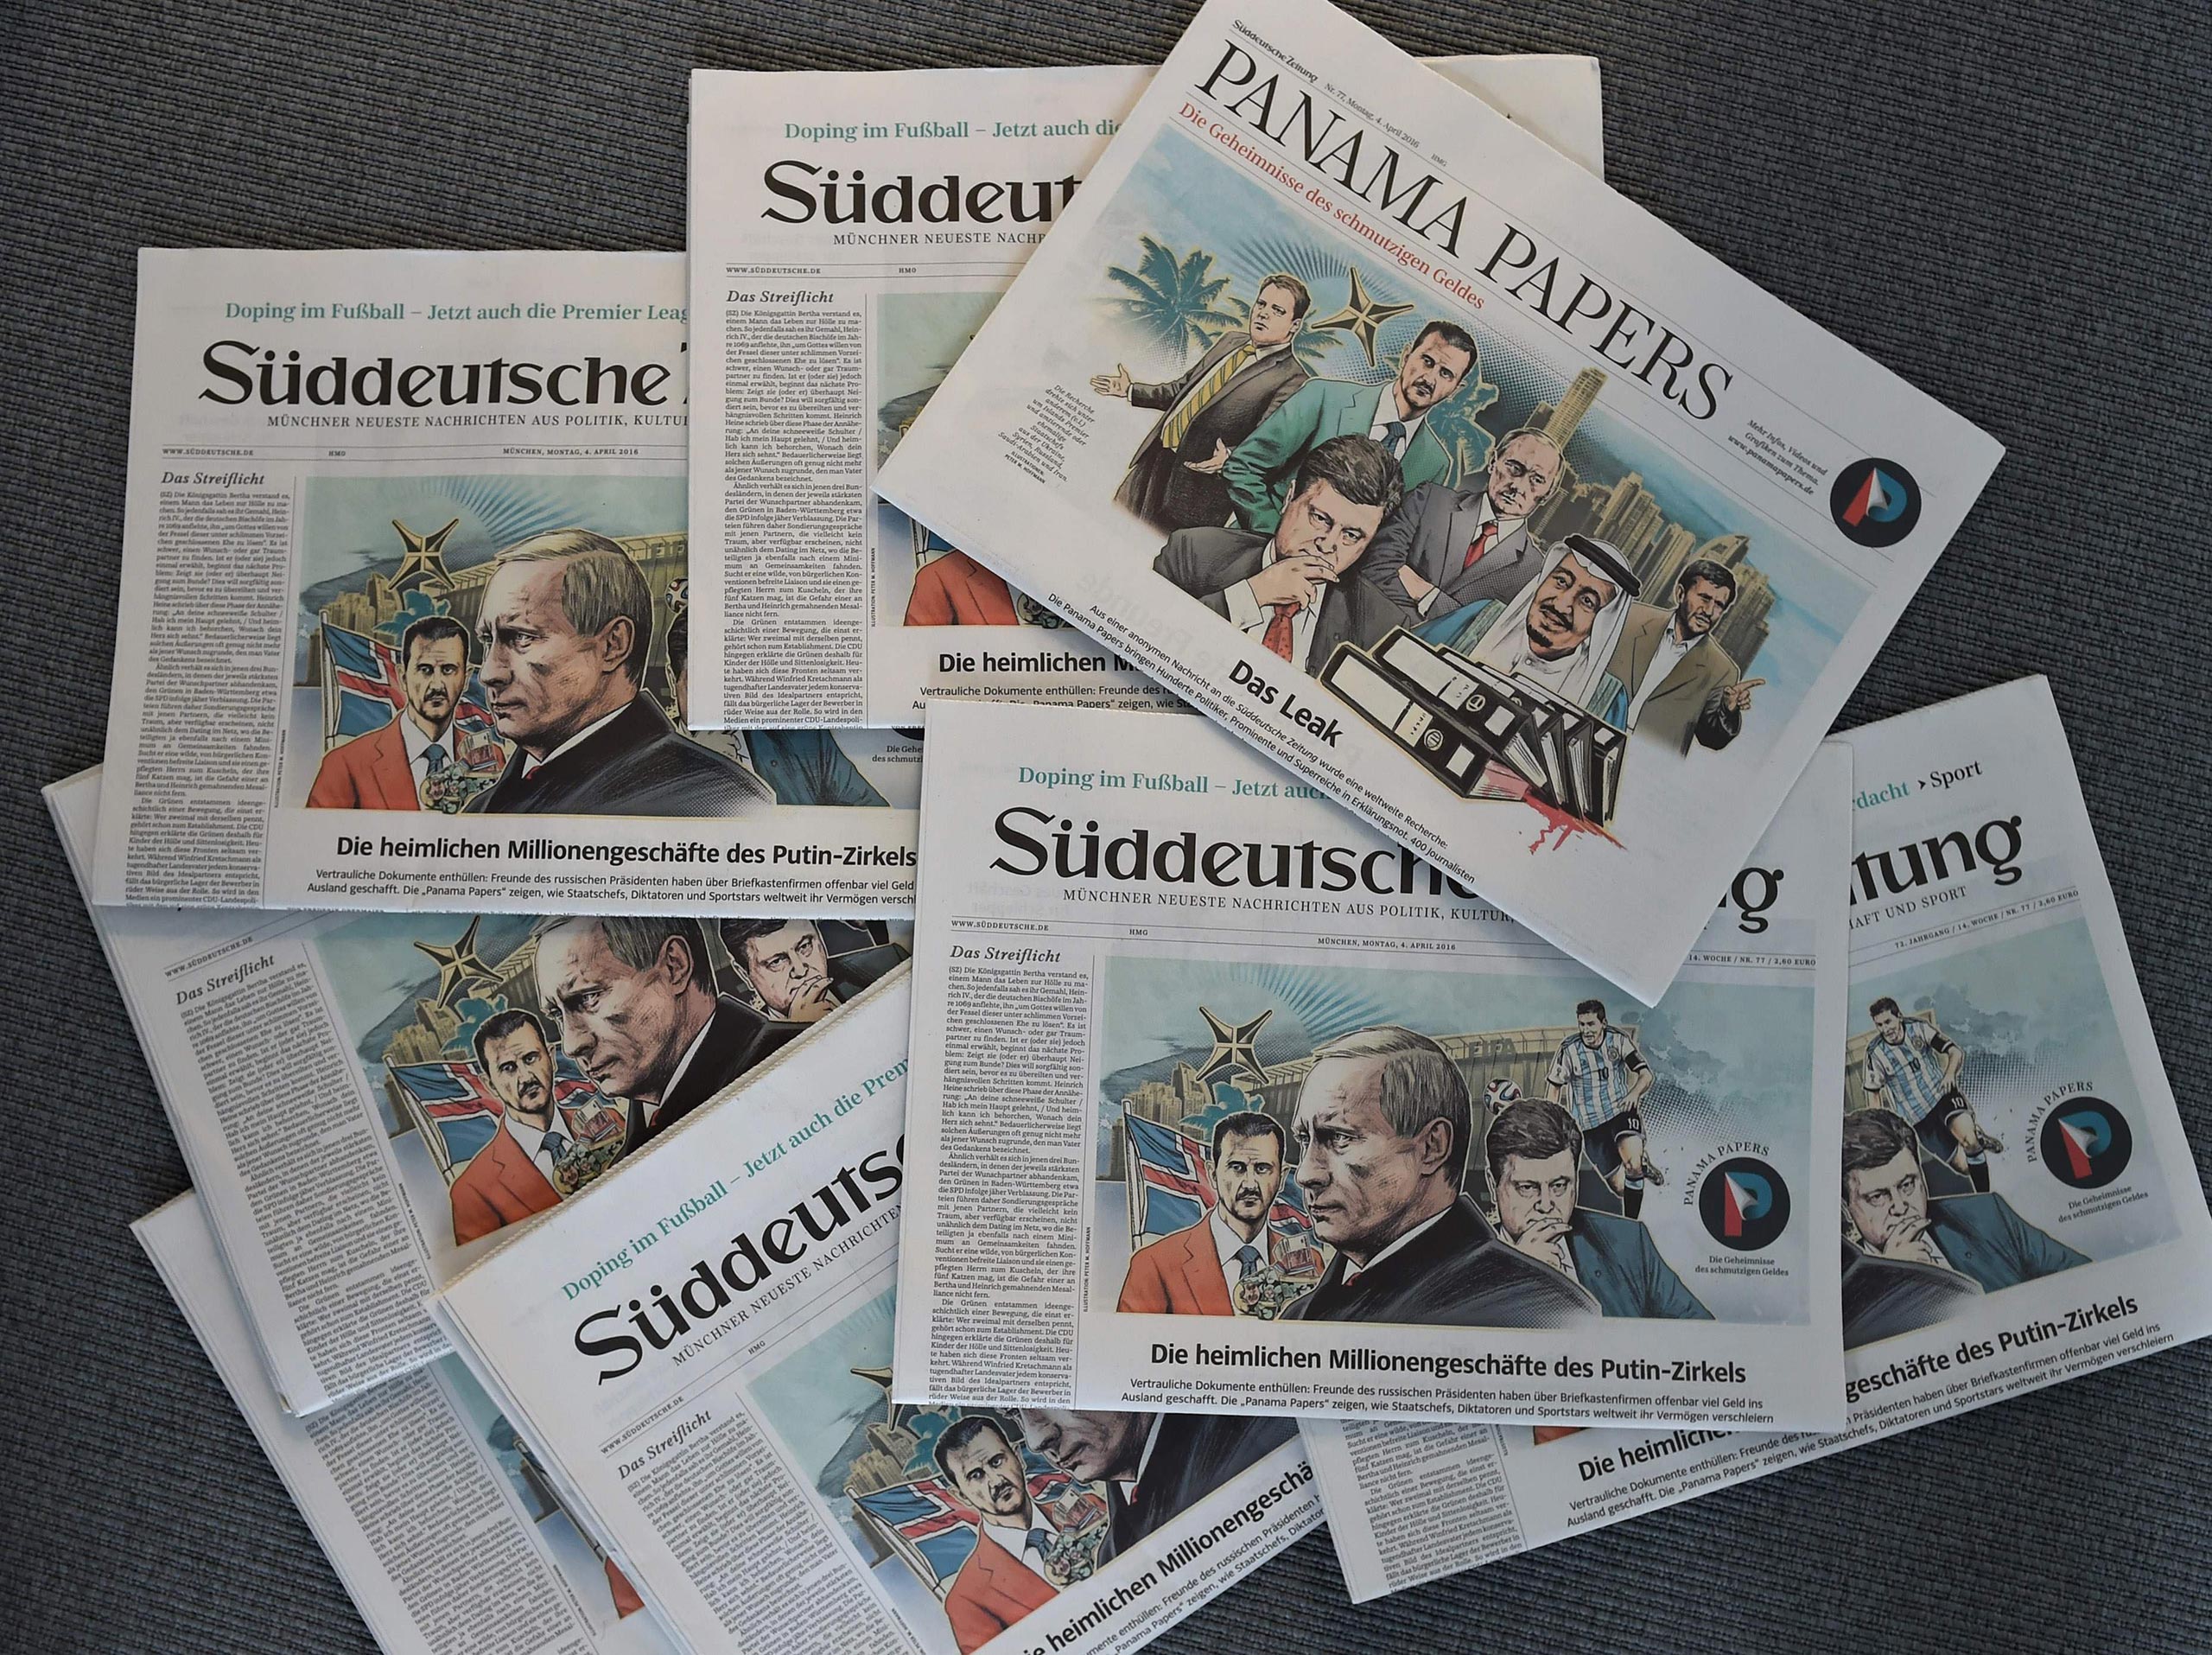 Issues of the German daily Sueddeutsche Zeitung, featuring illustrations of leaders including Russian President Vladimir Putin by Peter M Hoffmann, are seen at the newspaper's office in Munich, Germany, April 7, 2016. (Christof Stache—AFP/Getty Images)